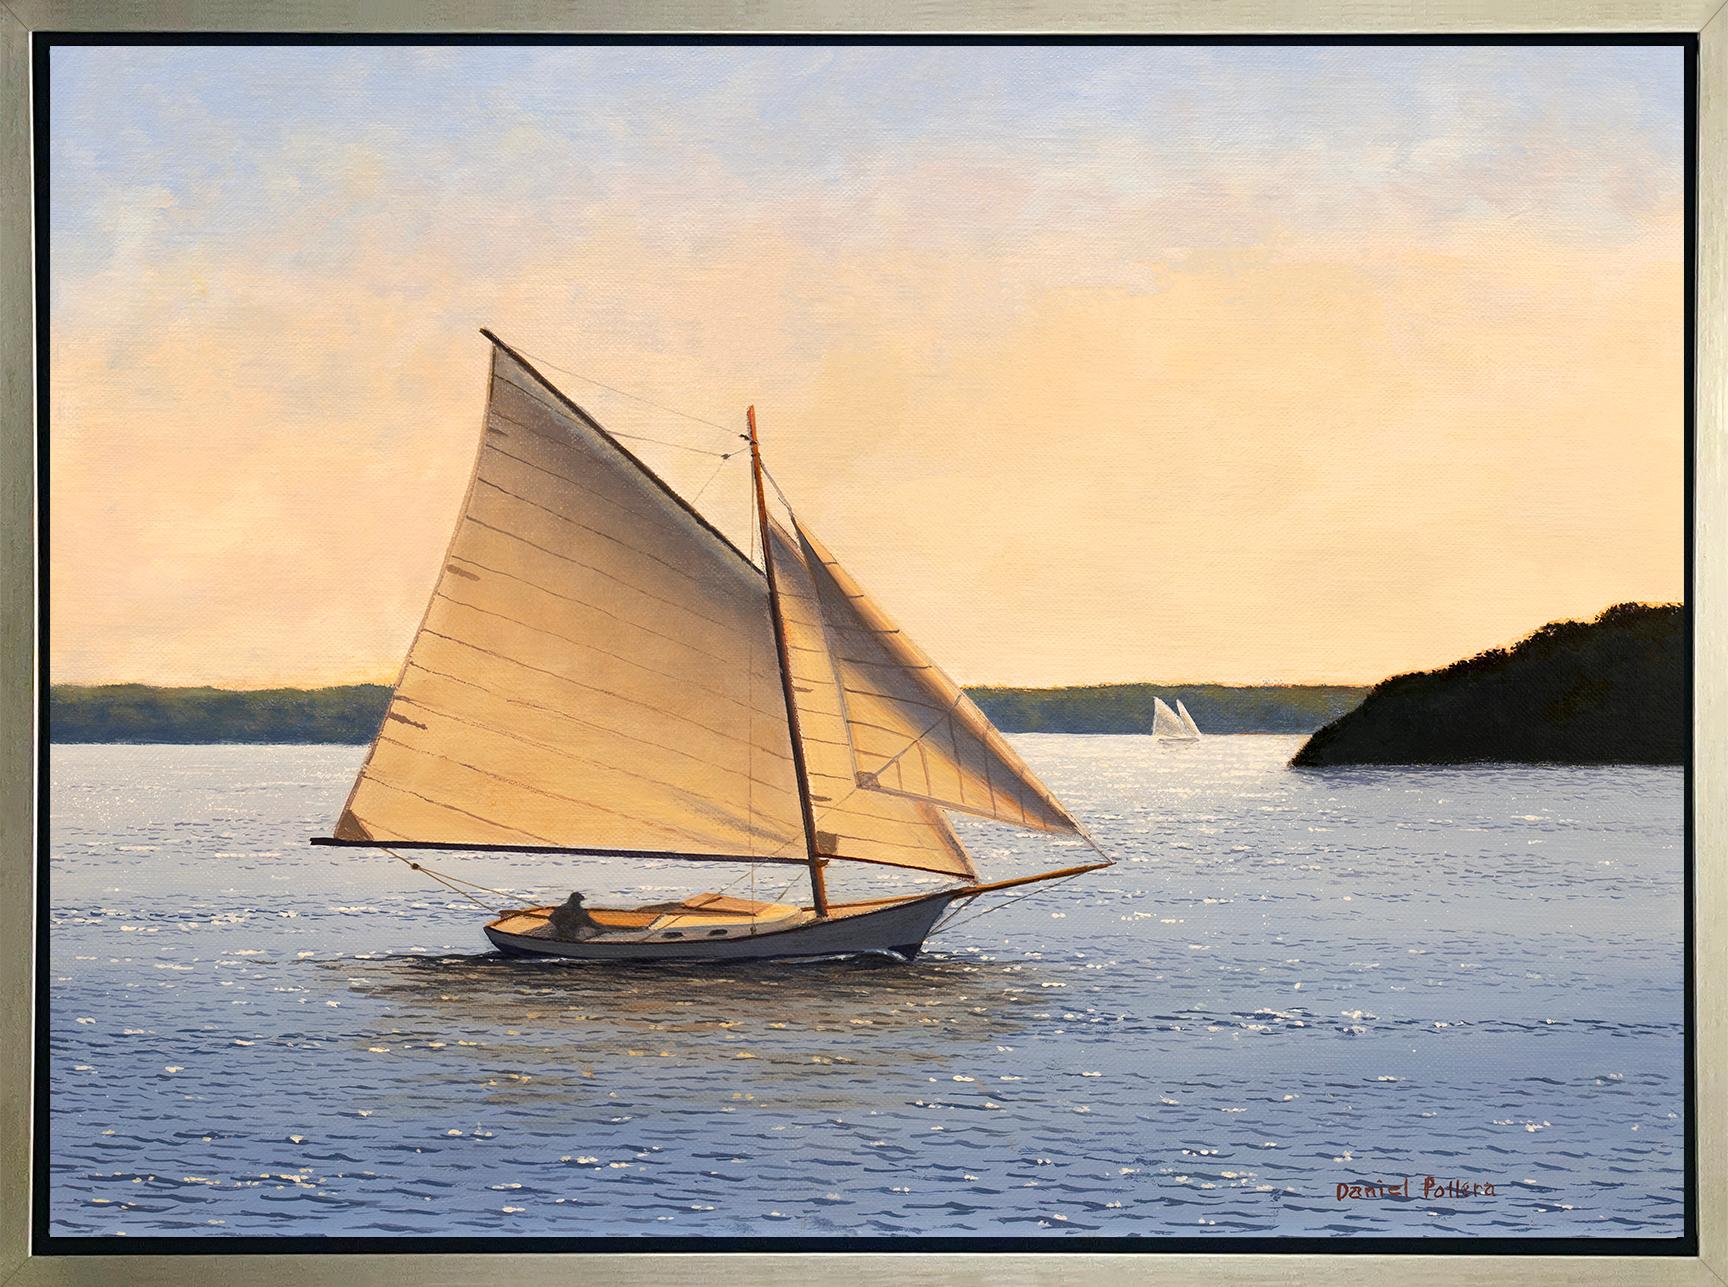 ""Sailing Out to Sea", gerahmter Giclee-Druck in limitierter Auflage, 18 Zoll x 24 Zoll